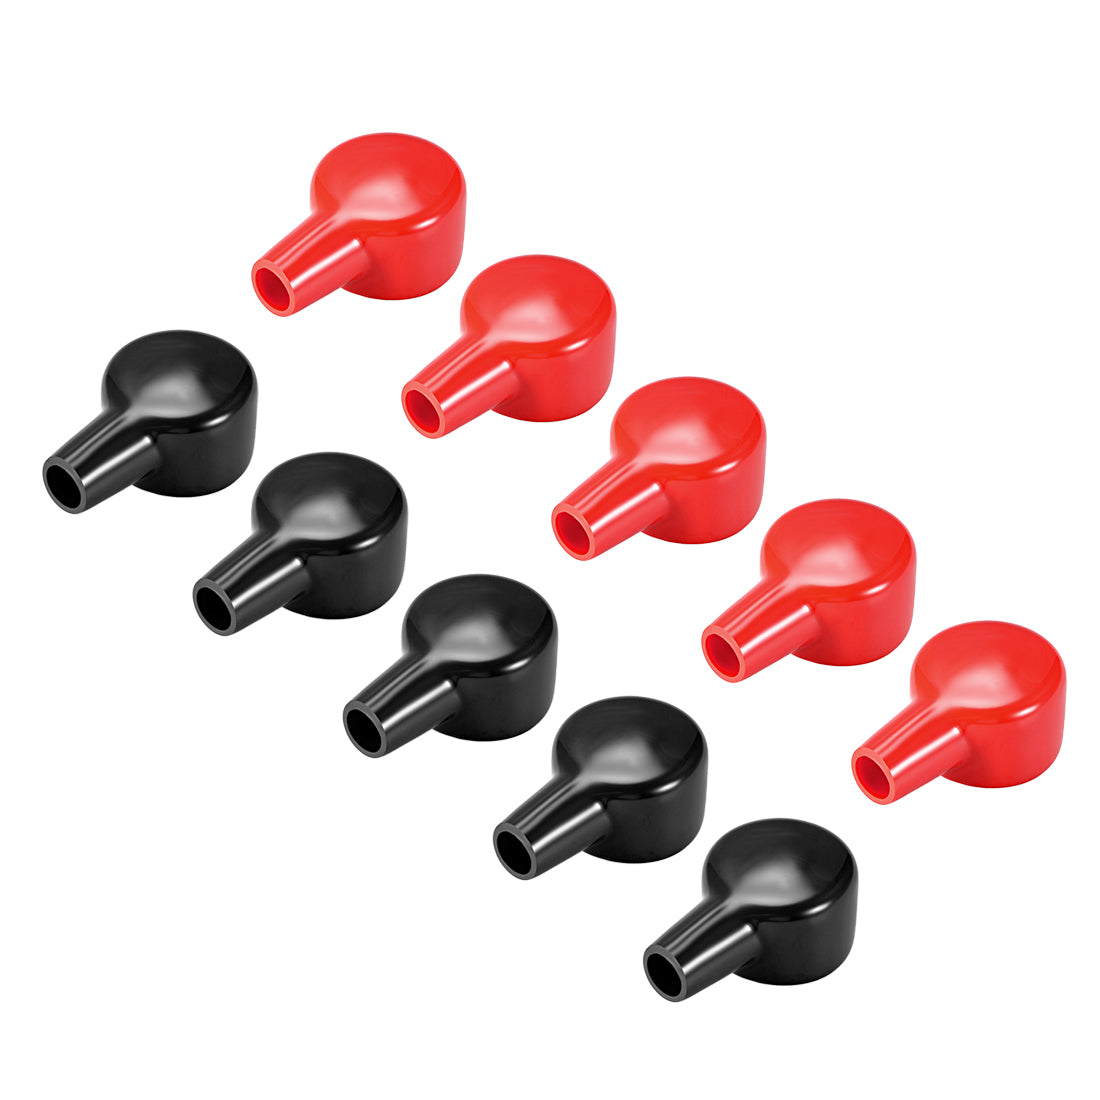 uxcell Uxcell Battery Terminal Insulating Rubber Protector Covers for 43mm Terminal 15mm Cable Red Black 5 Pairs